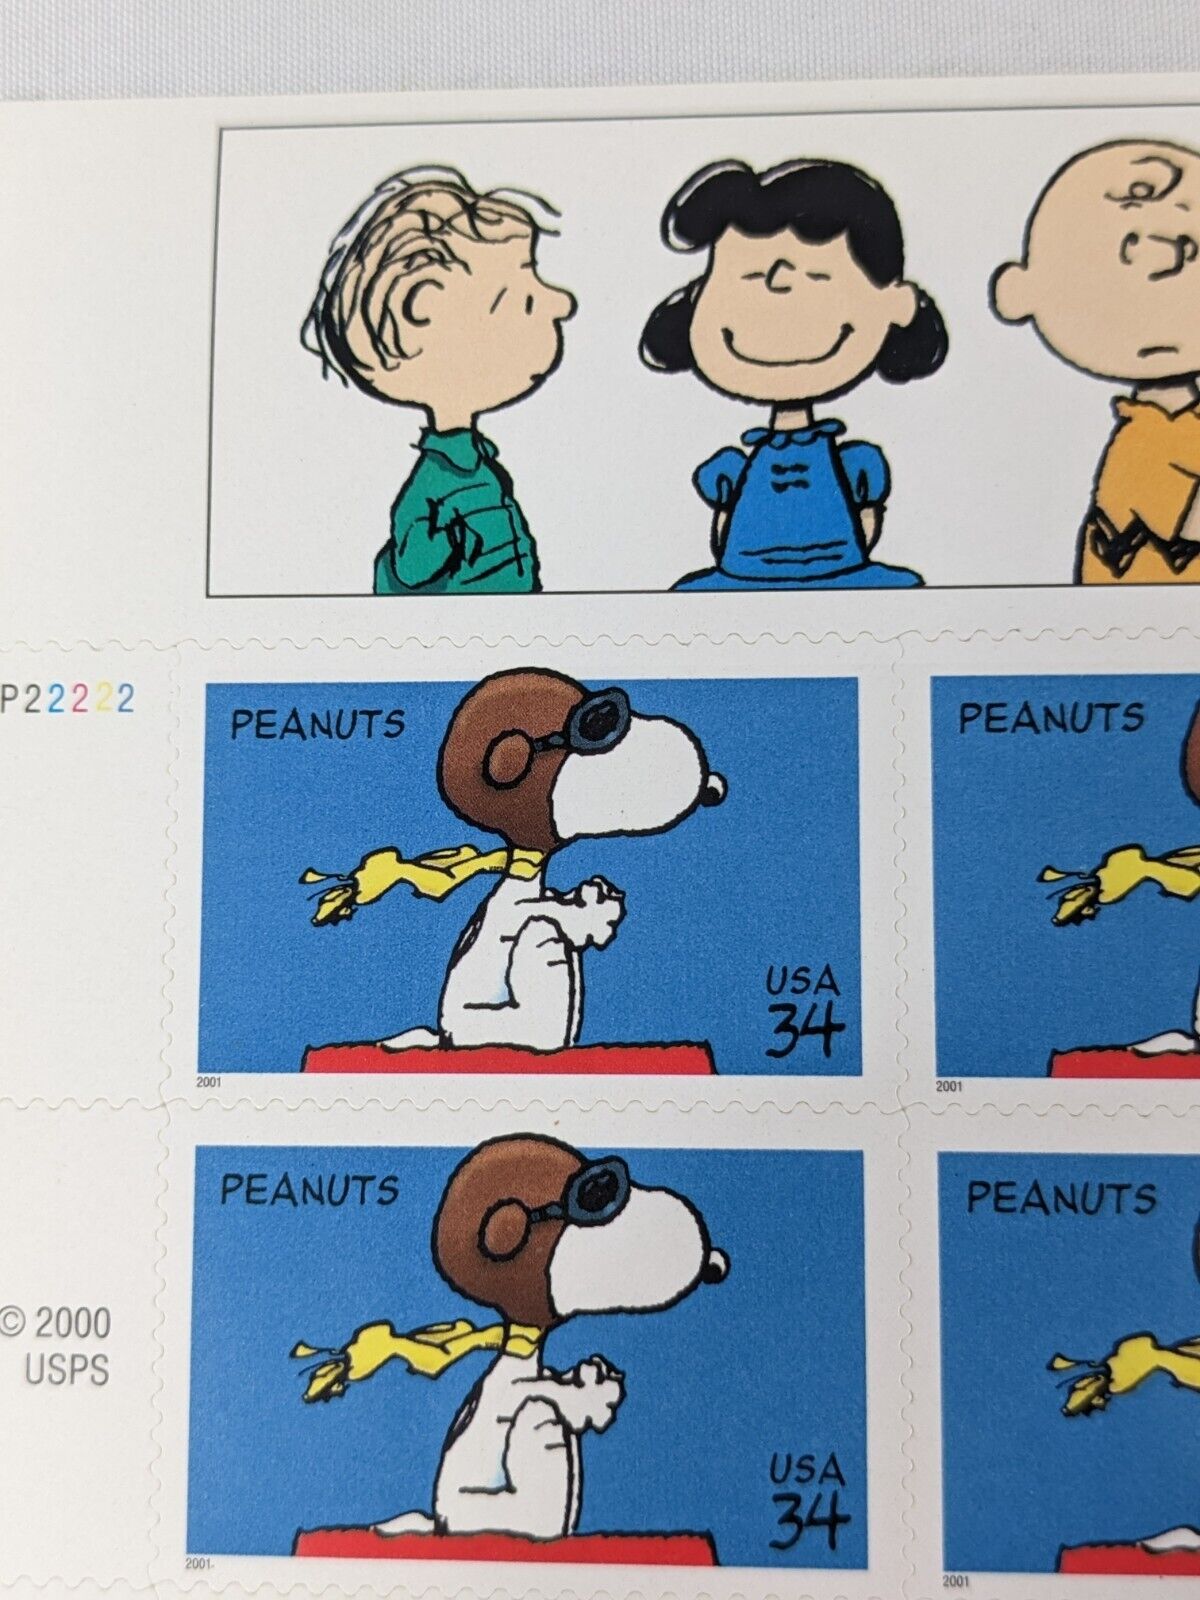 Peanuts by Shulz USA .34 Collectible United States US Postage Stamps